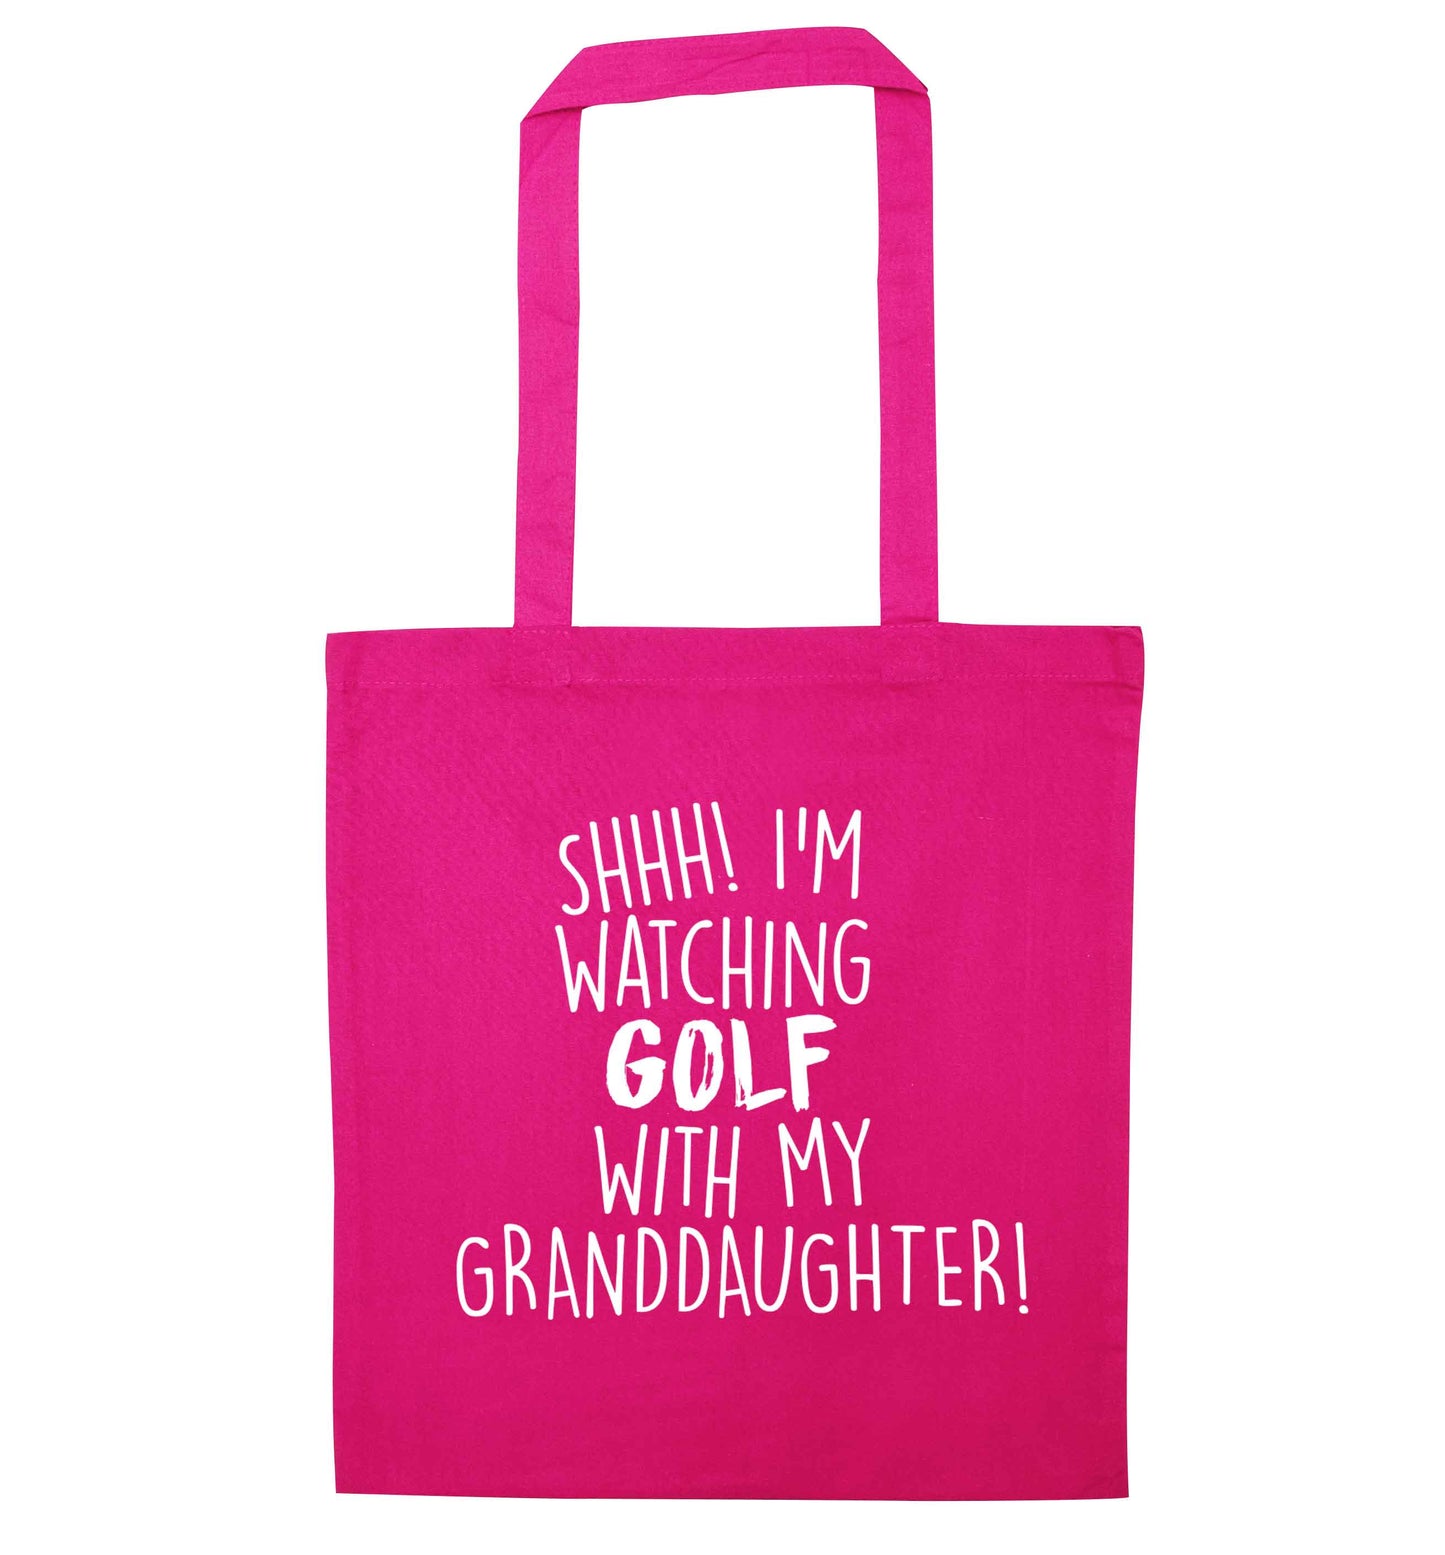 Shh I'm watching golf with my granddaughter pink tote bag